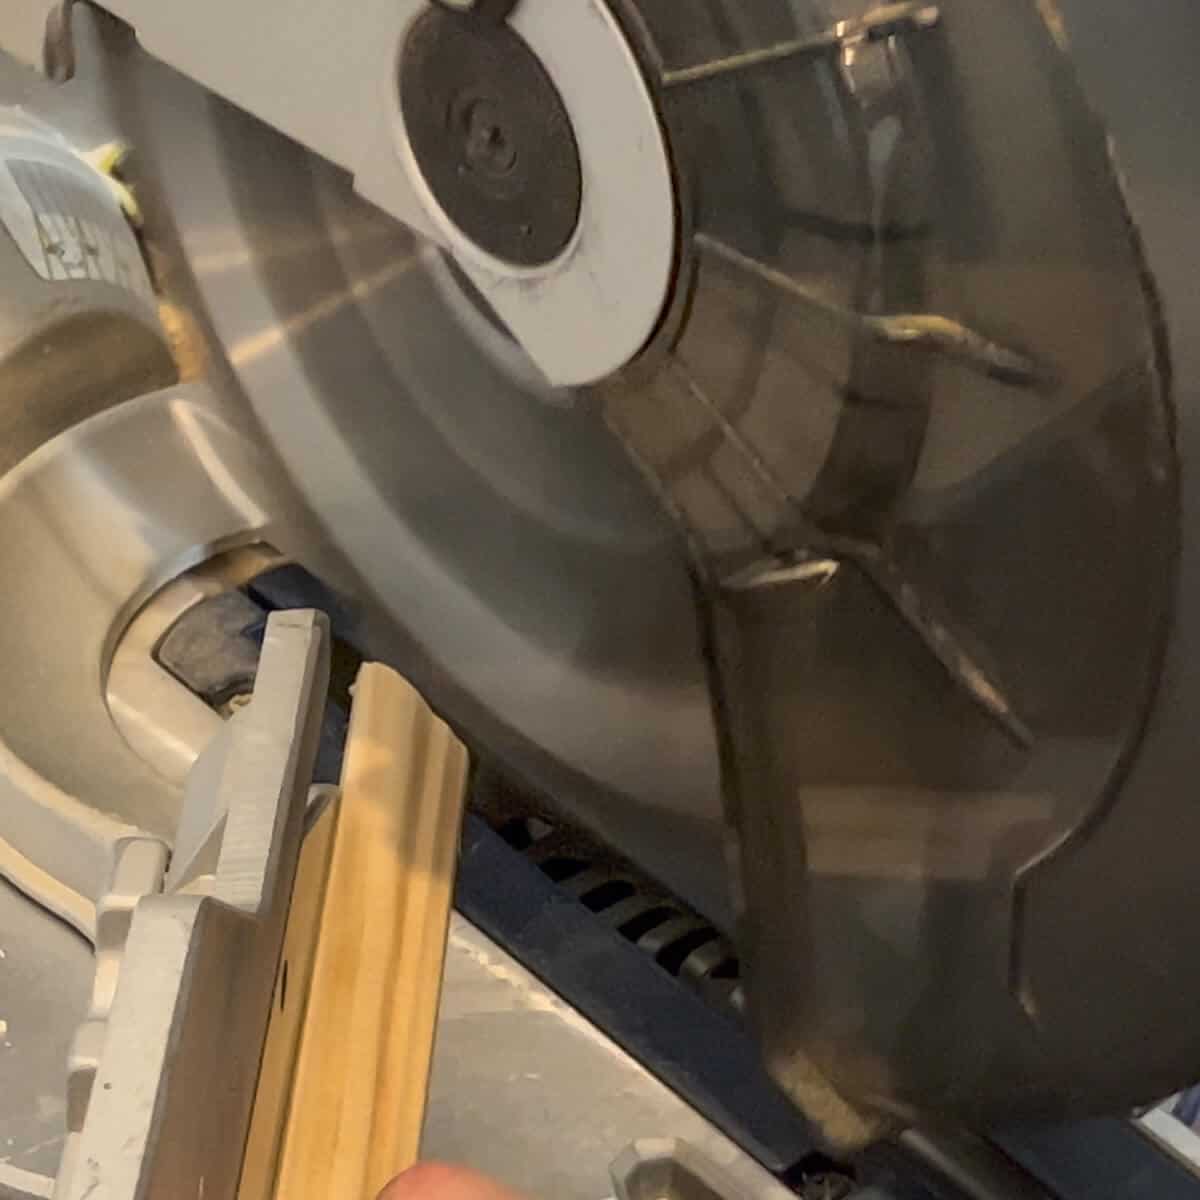 Miter saw cutting picture trim molding